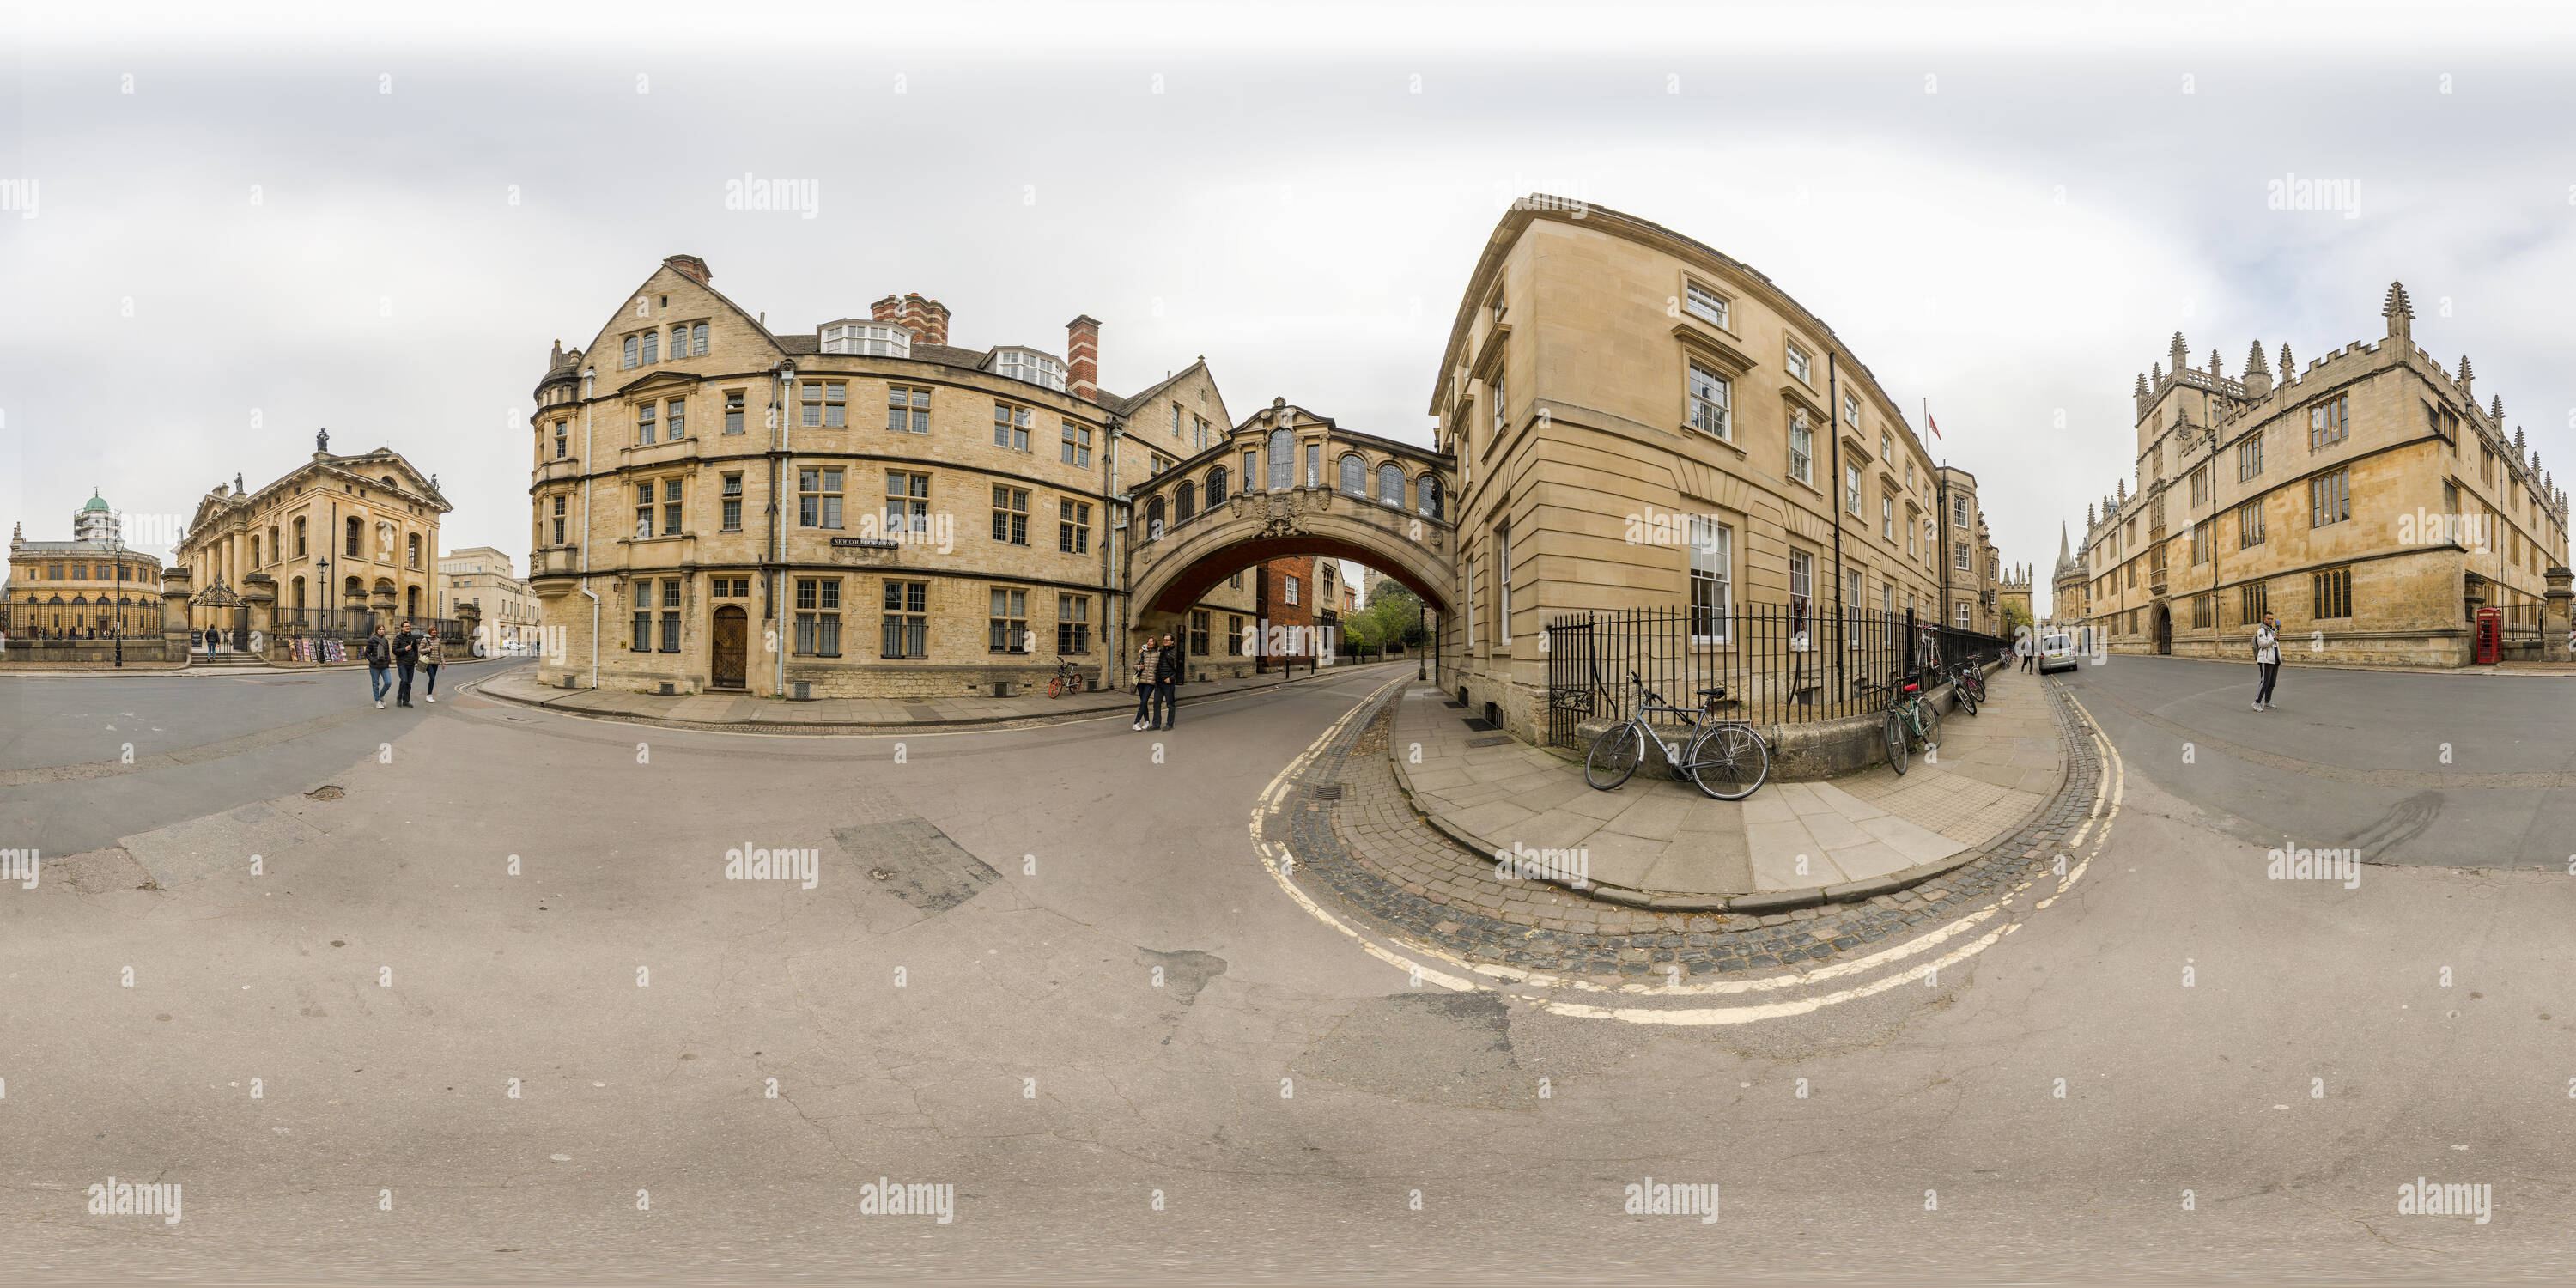 360 degree panoramic view of Bridge of Sighs connecting separate buildings of Hertford college, Oxford university, England, on an overcast day.